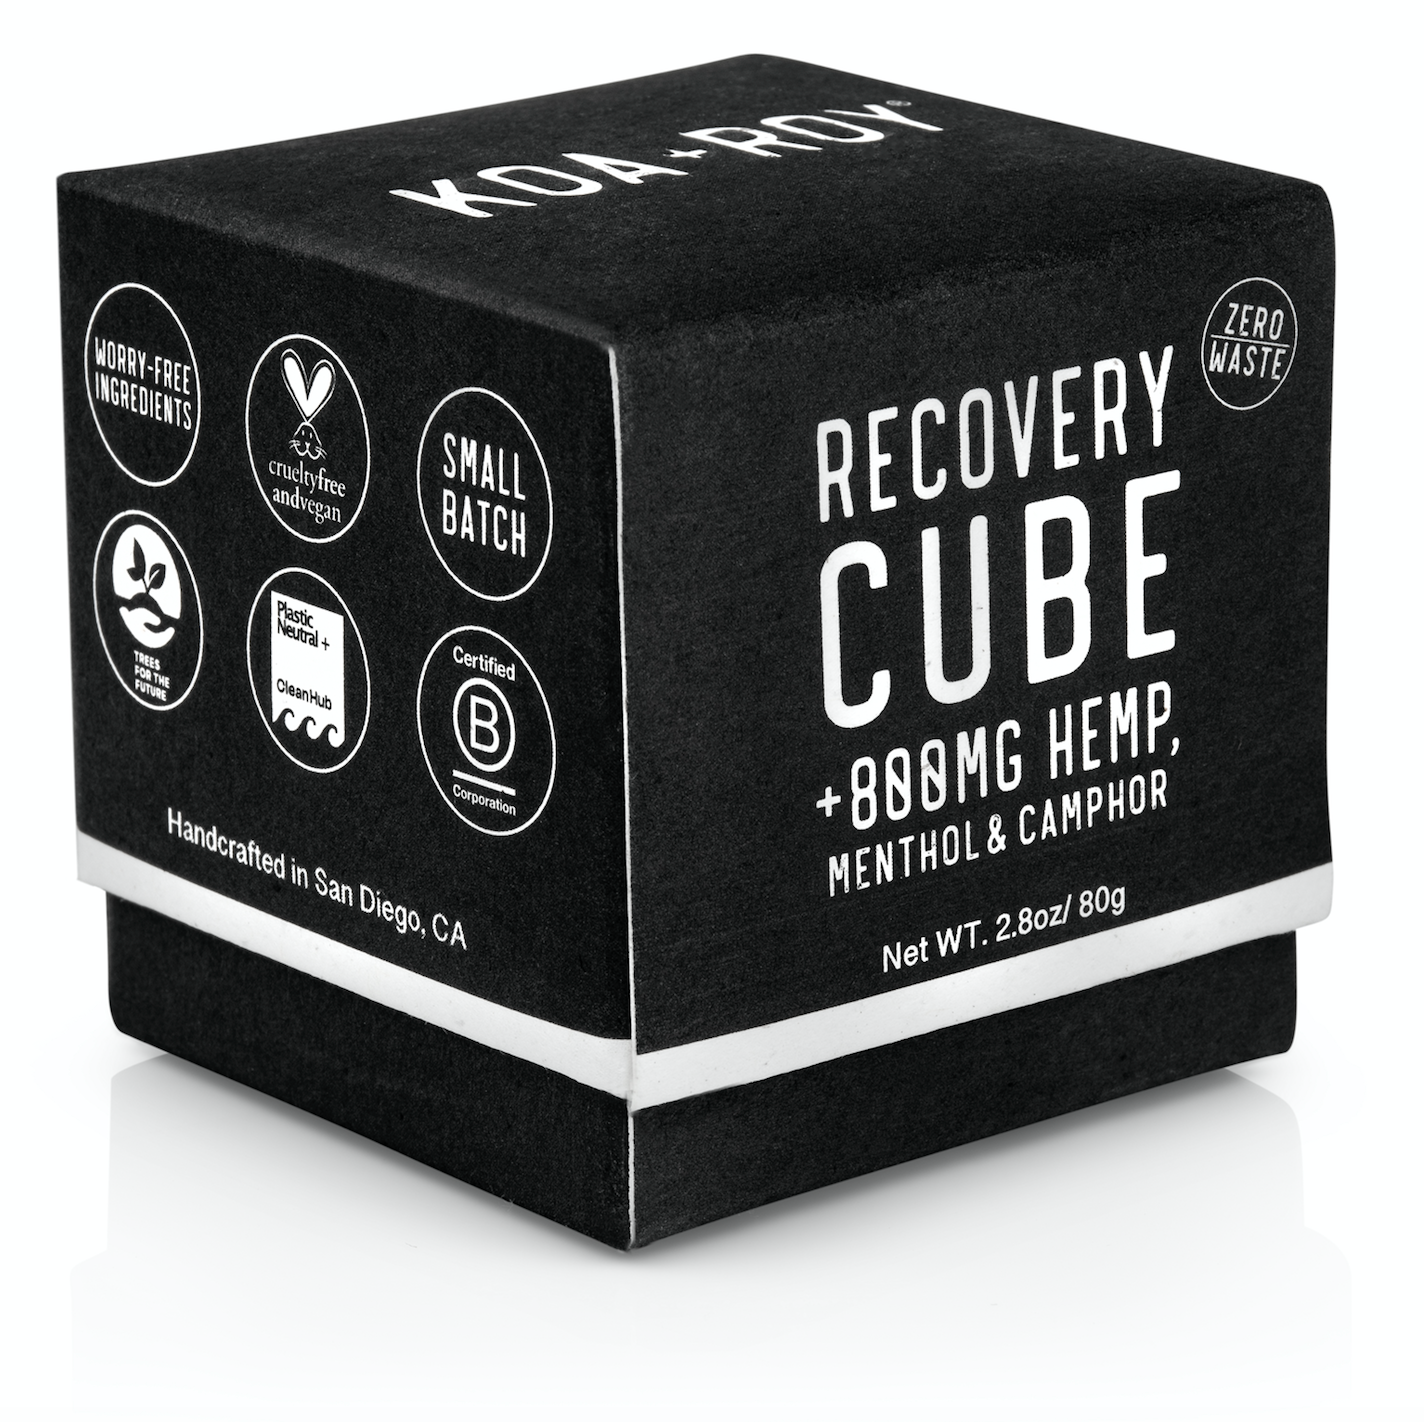 RECOVERY CUBE